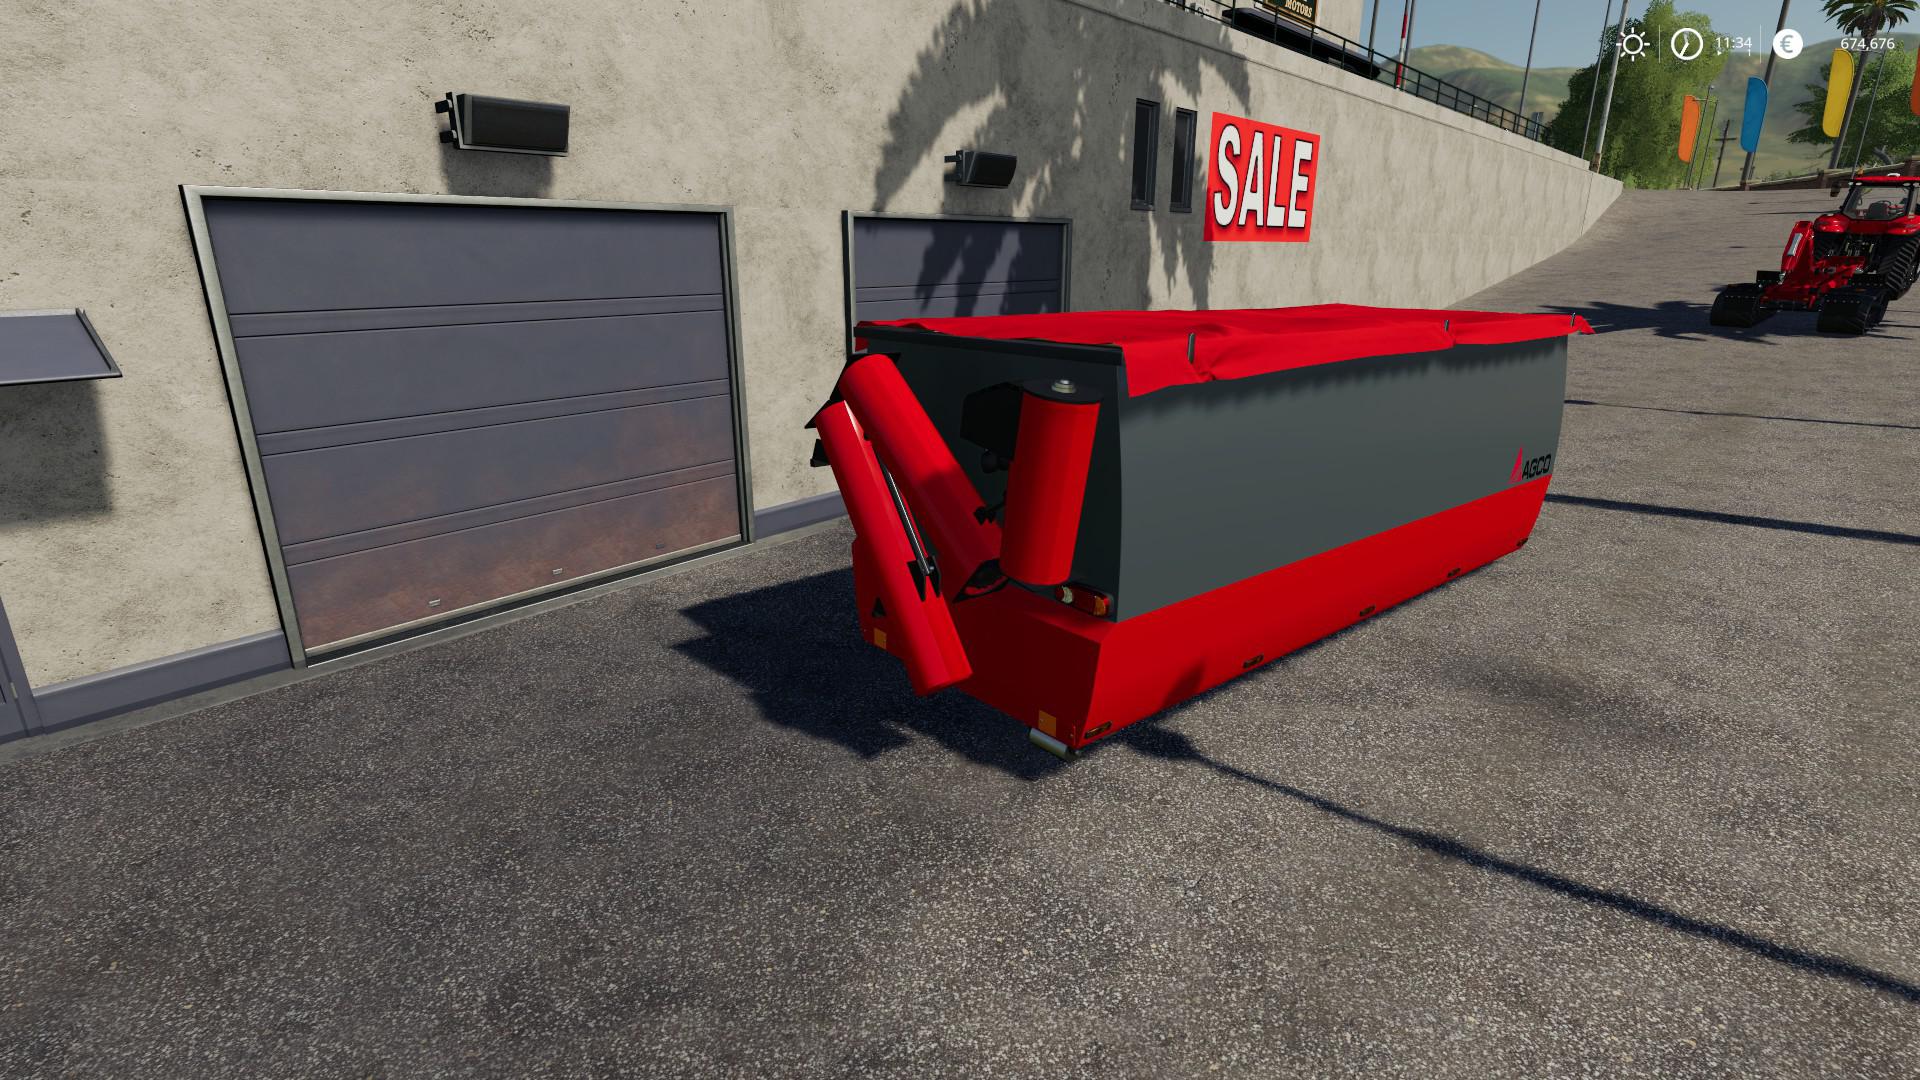 FS19 Peecon hooklift Auger Container v1.0.0.0.